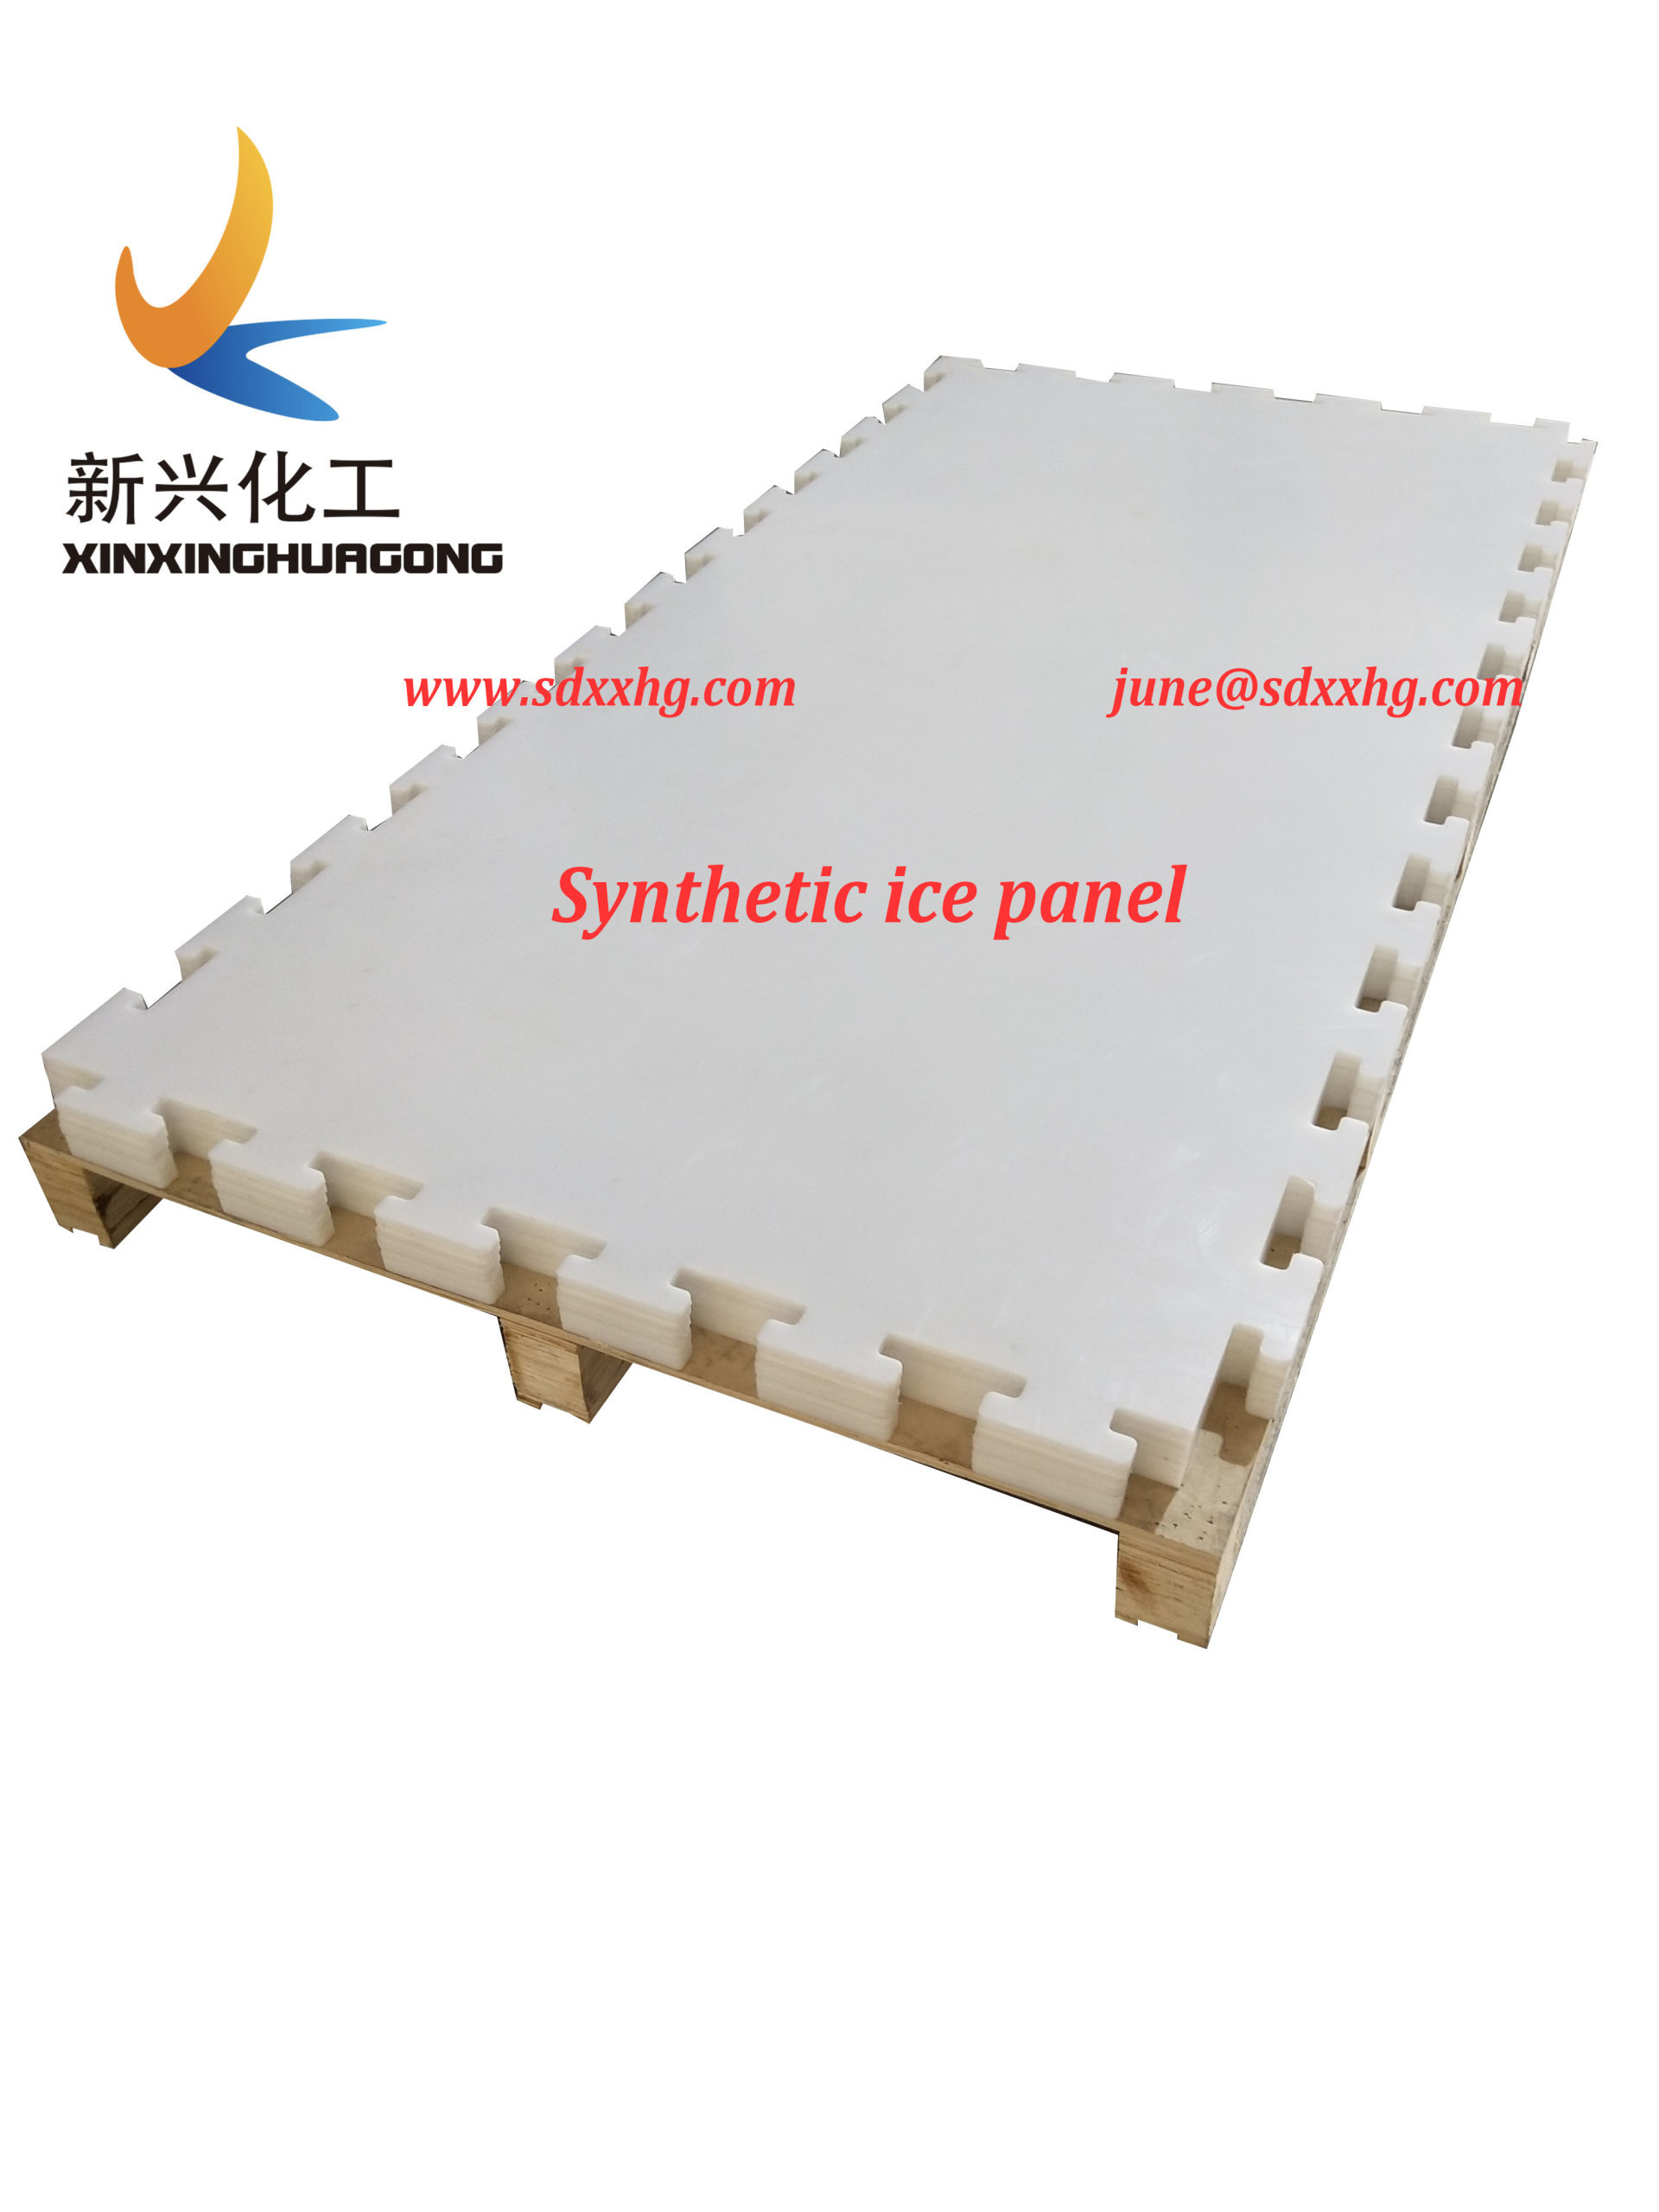 High quality uhmwpe sheet for synthetic ice rink,  skate board